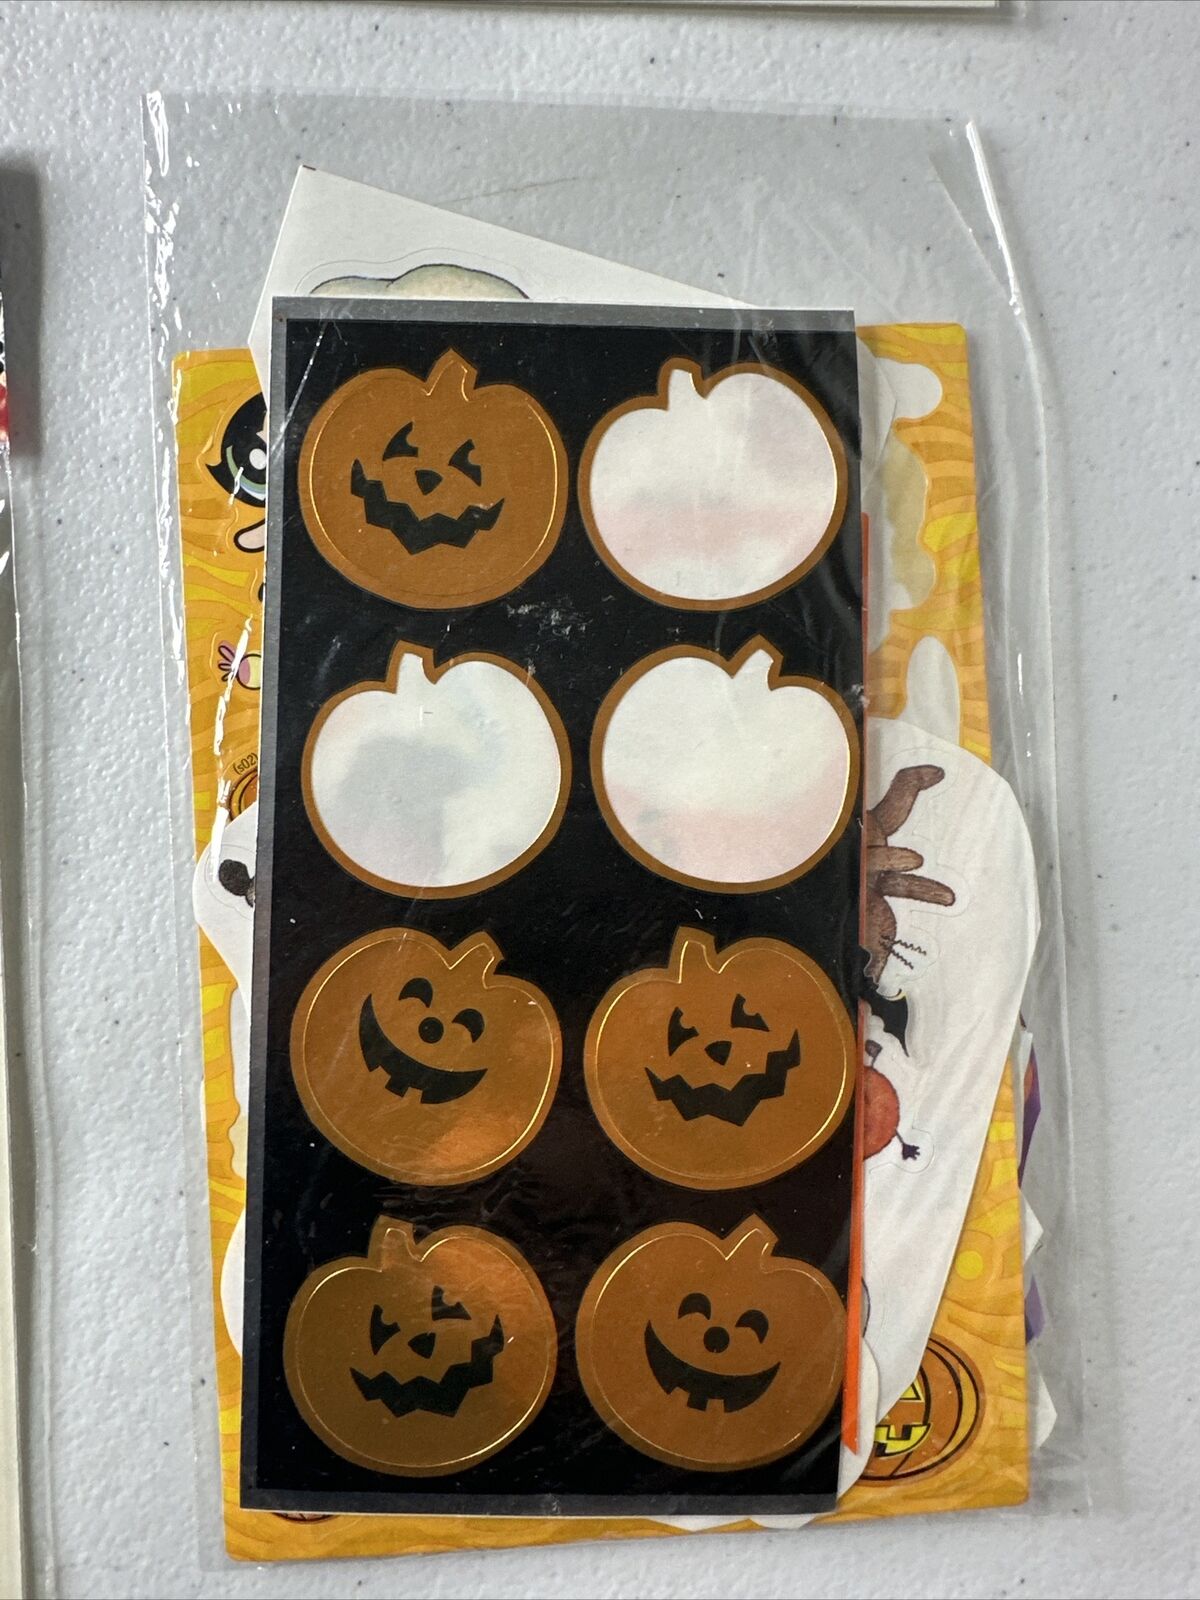 Complete Vintage Halloween Sticker Pack Lot – Disney, Mrs. Grossman's, Sealed & Opened Mixed Sheets - TreasuTiques